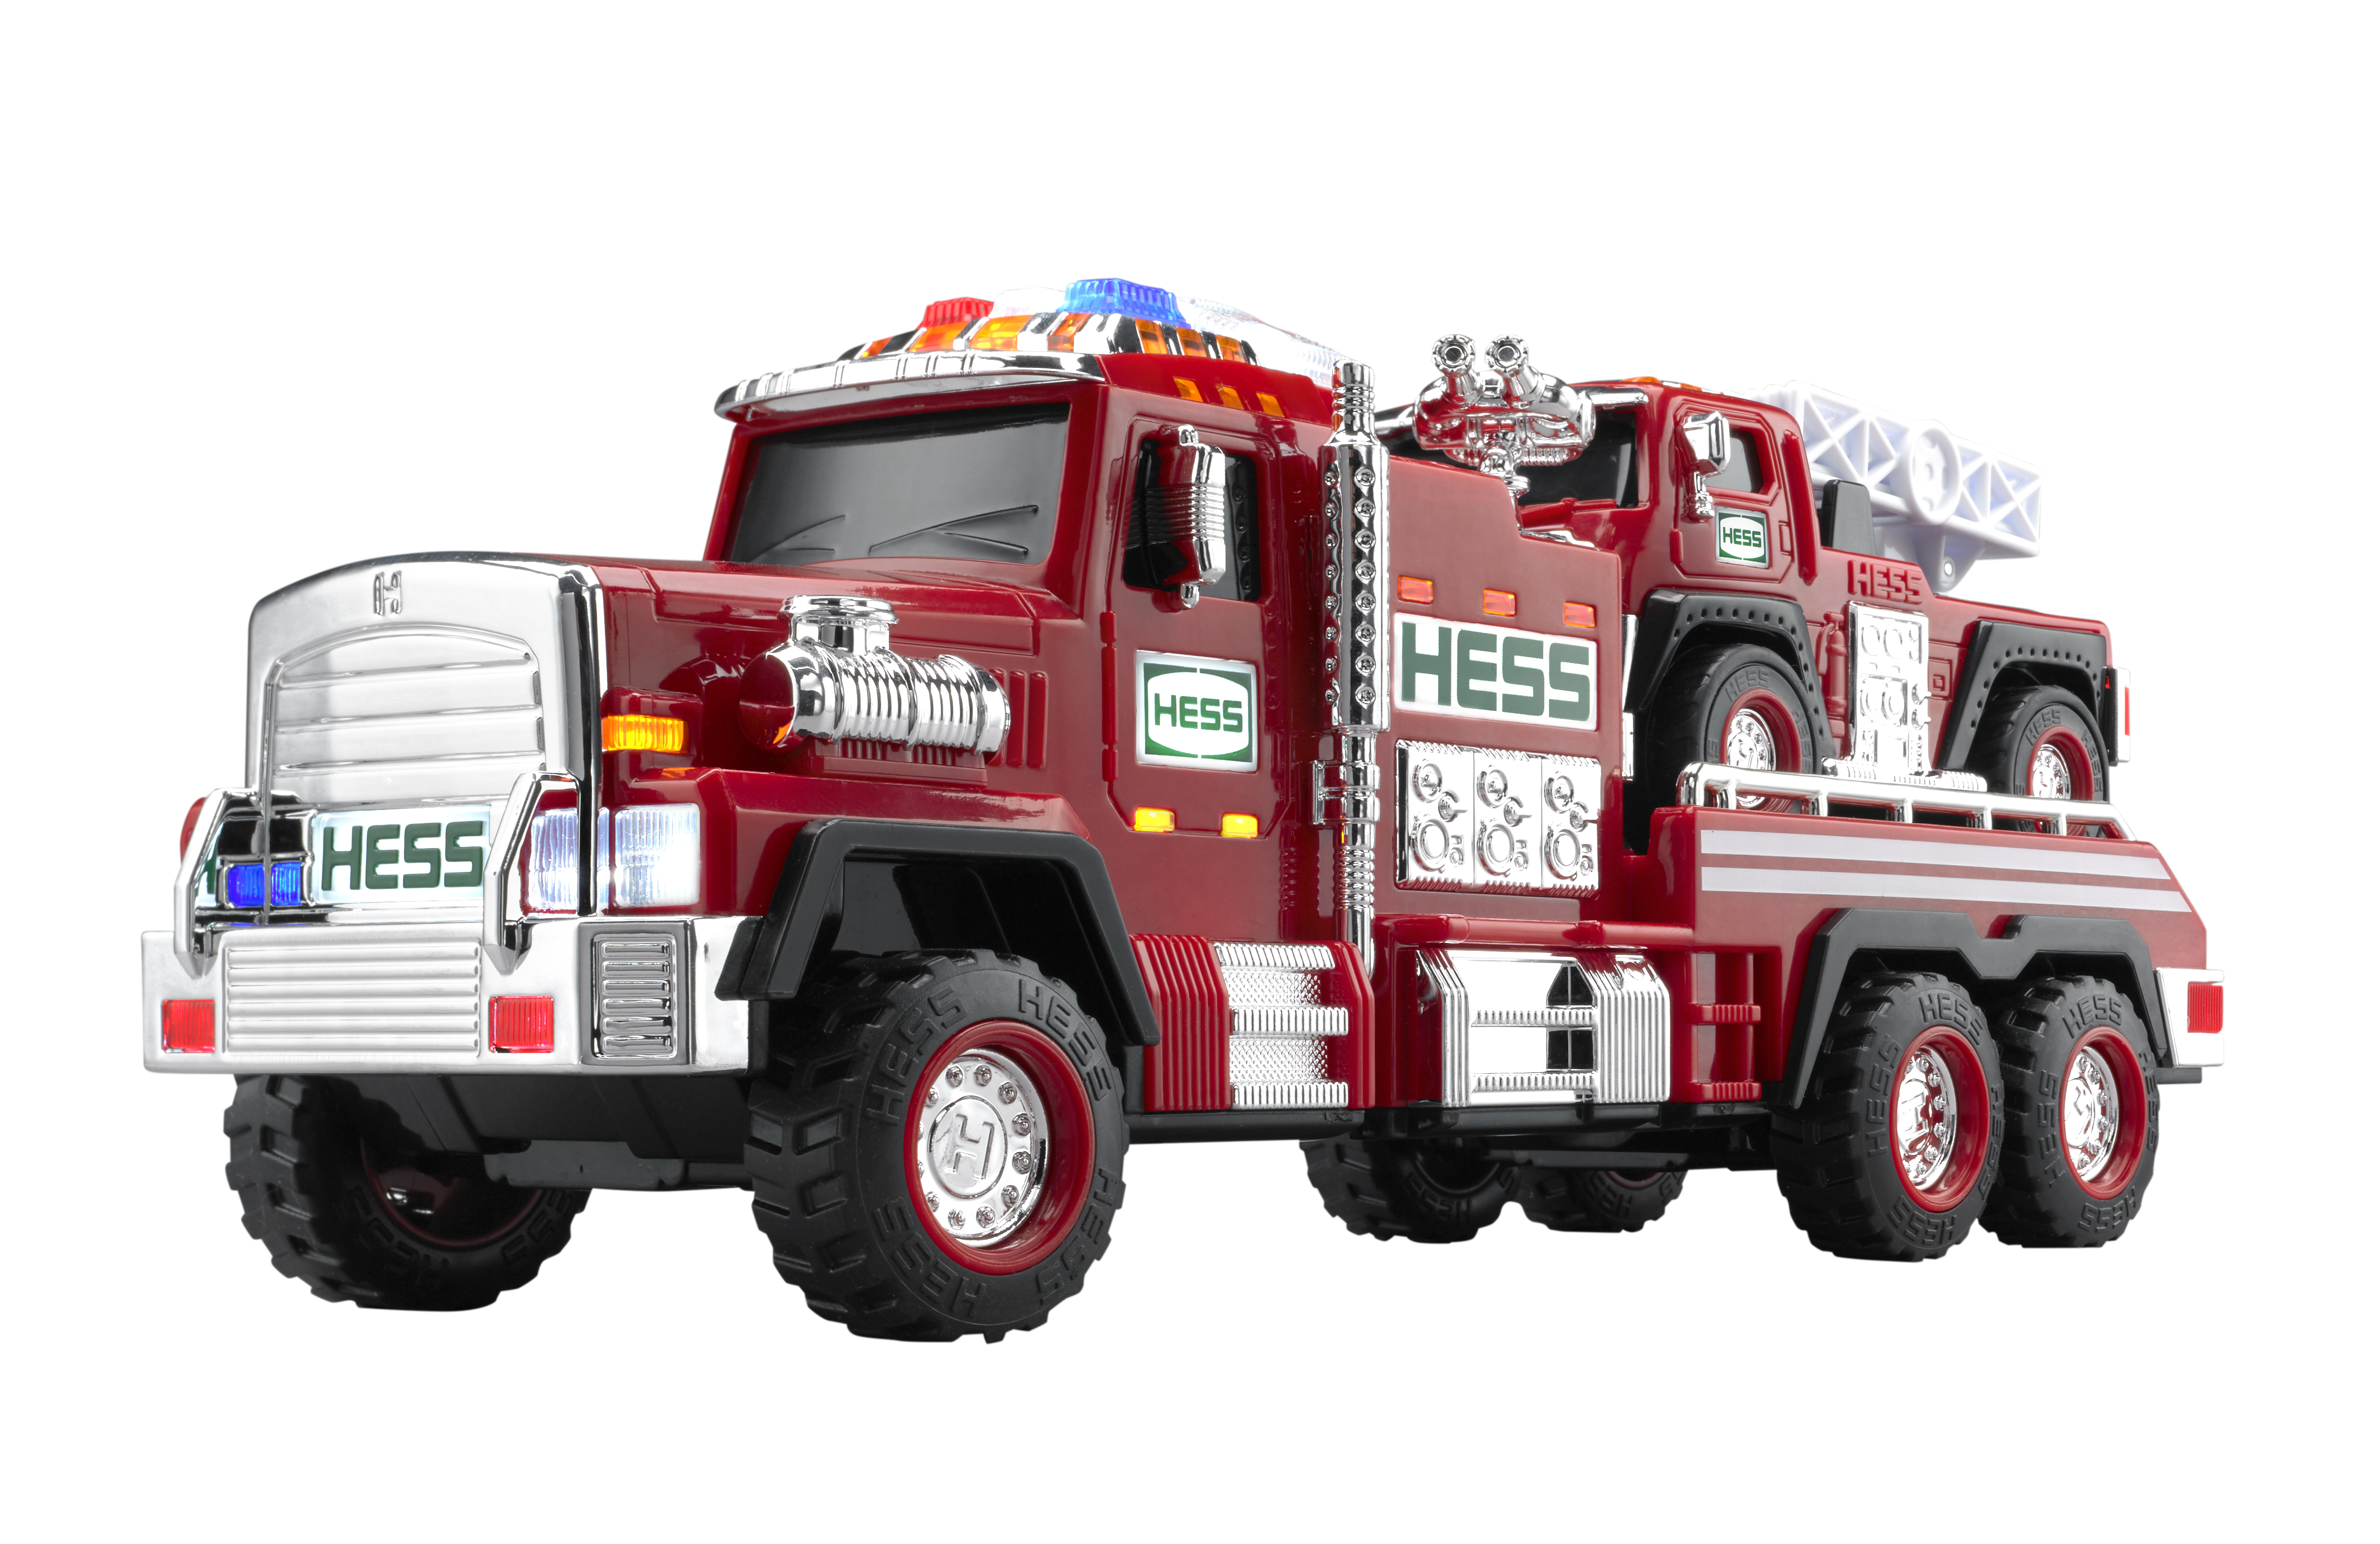 Fire Truck Wallpapers Vehicles Hq Fire Truck Pictures 4k Wallpapers 2019